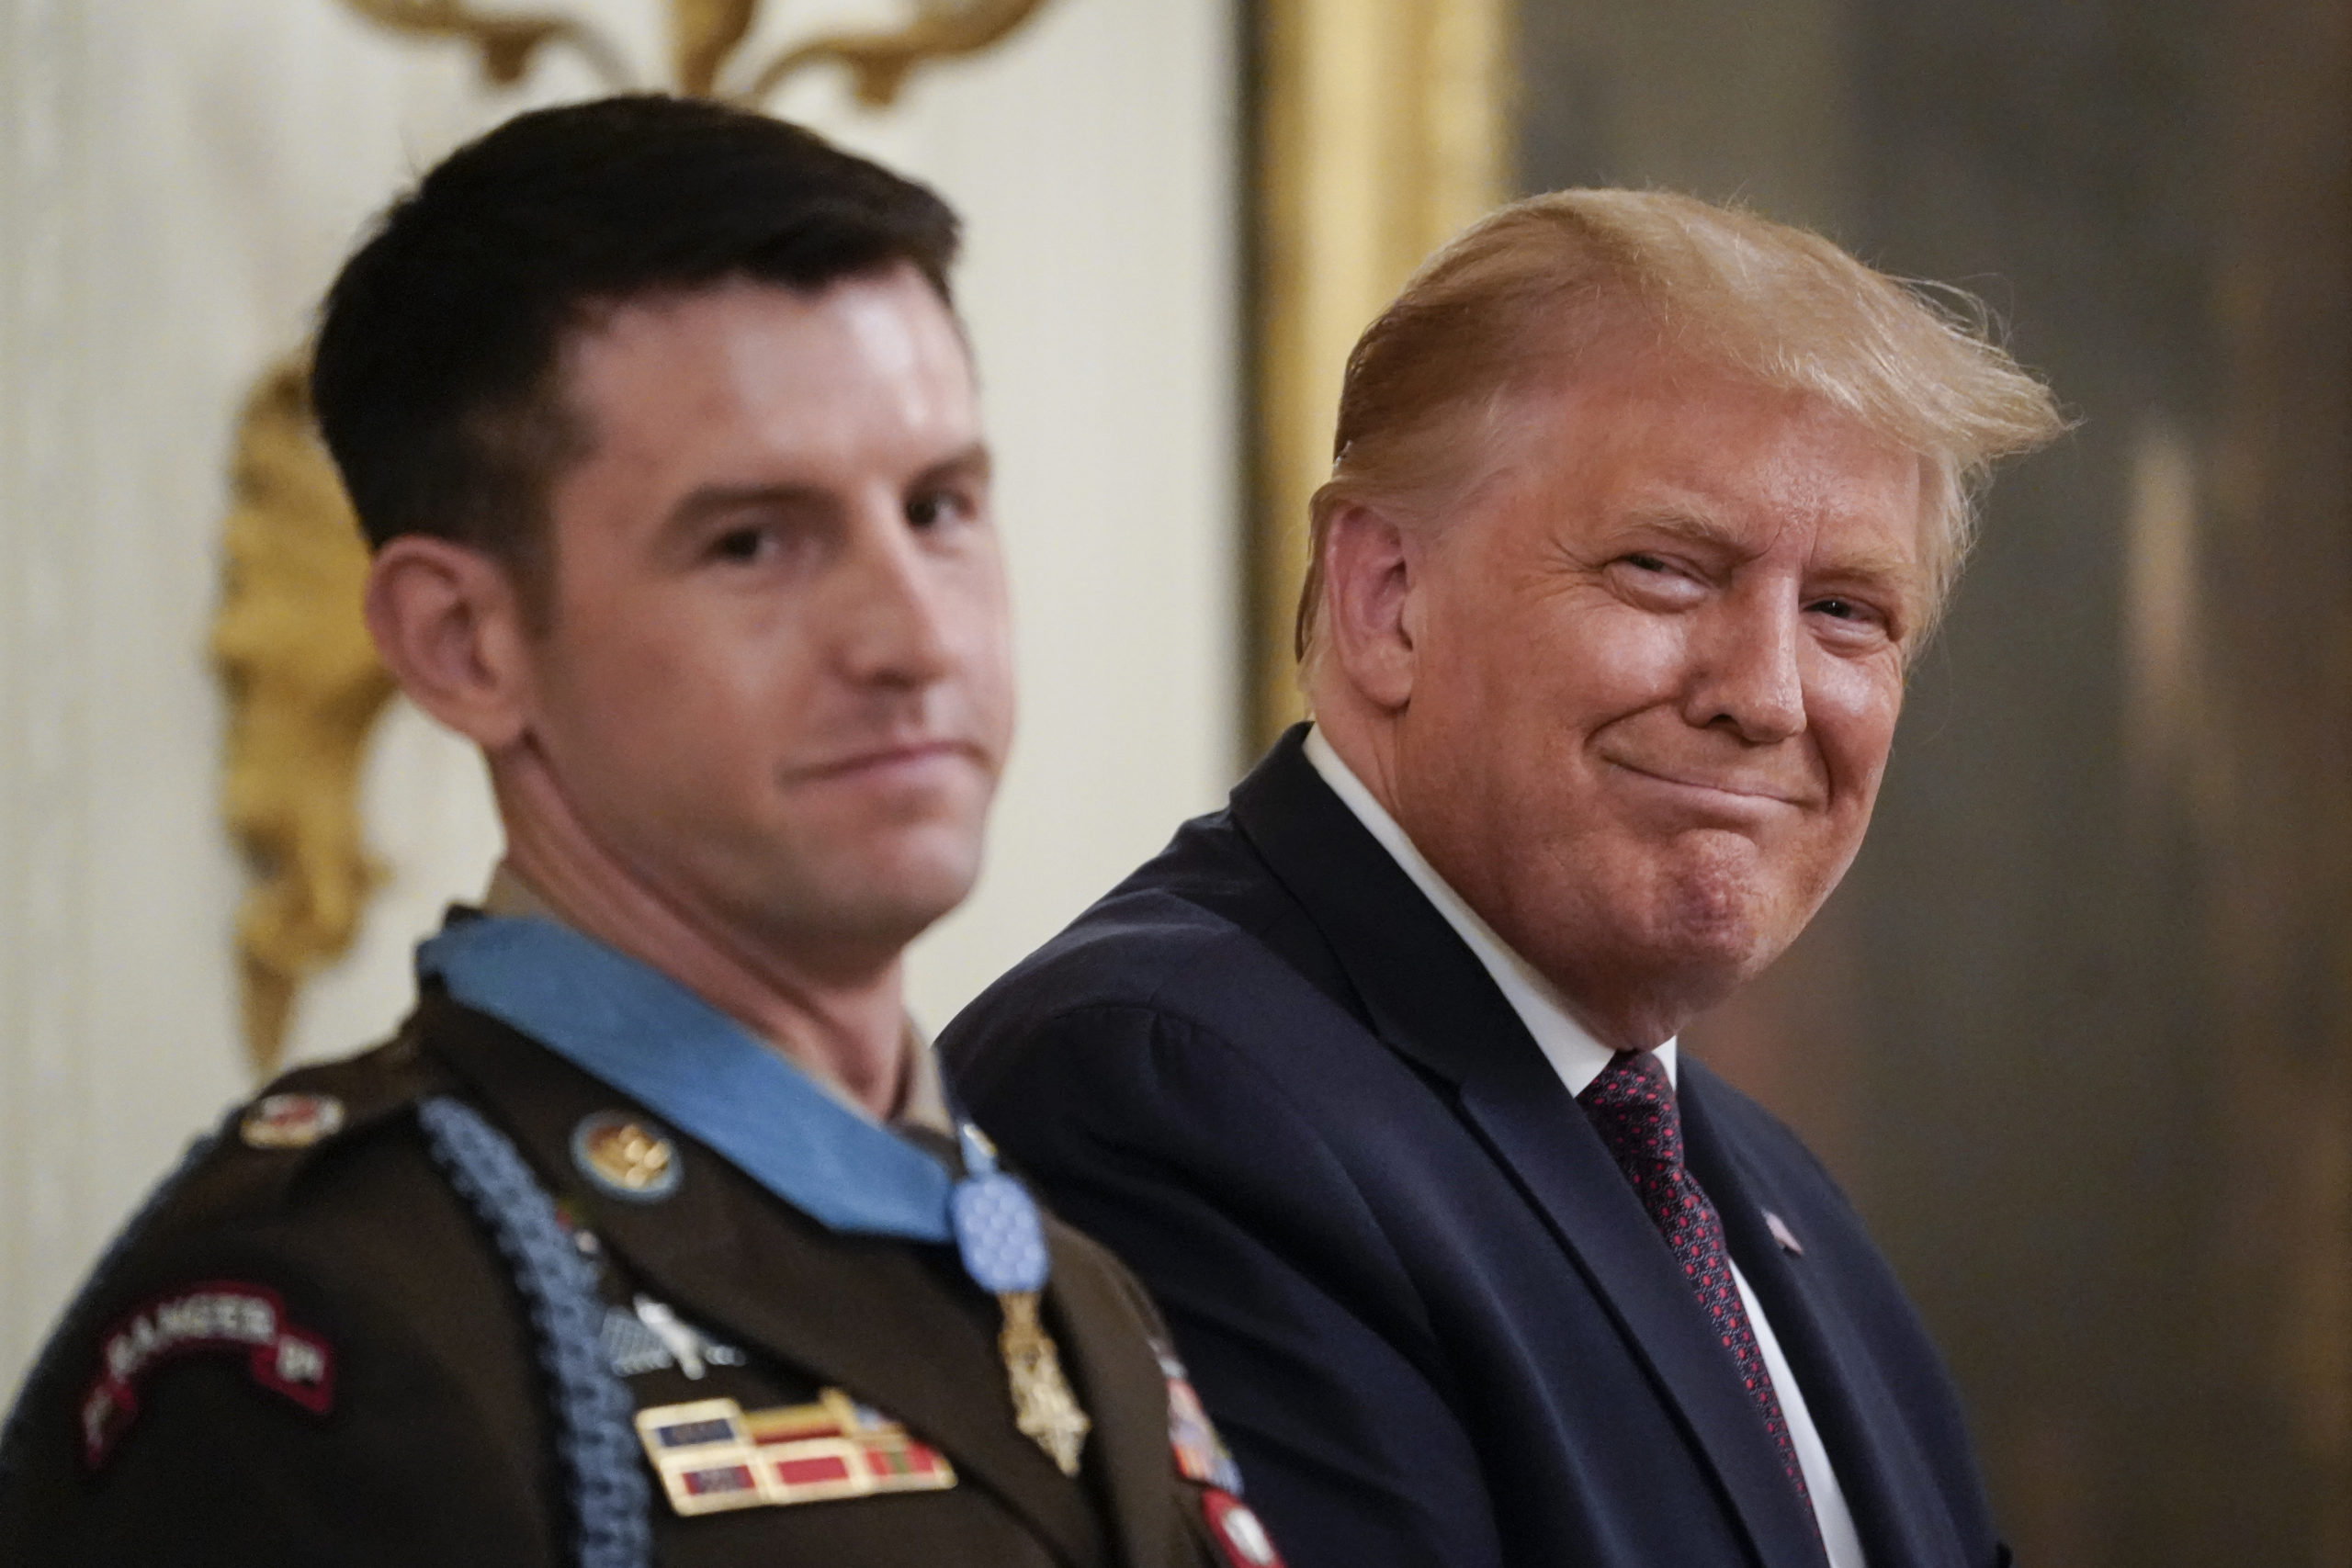 WASHINGTON, DC - SEPTEMBER 11: U.S. President Donald Trump presents the Medal of Honor to Sergeant Major Thomas P. Payne, United States Army, for conspicuous gallantry in the East Room of the White House on September 11, 2020 in Washington, DC. On October 22, 2015, during a daring nighttime hostage rescue in Kirkuk Province, Iraq, then-Sergeant First Class Payne led a combined assault team charged with clearing one of two buildings known to house hostages. His actions were key to liberating 75 hostages during a rescue mission that resulted in 20 enemy fighters killed in action. (Photo by Drew Angerer/Getty Images)